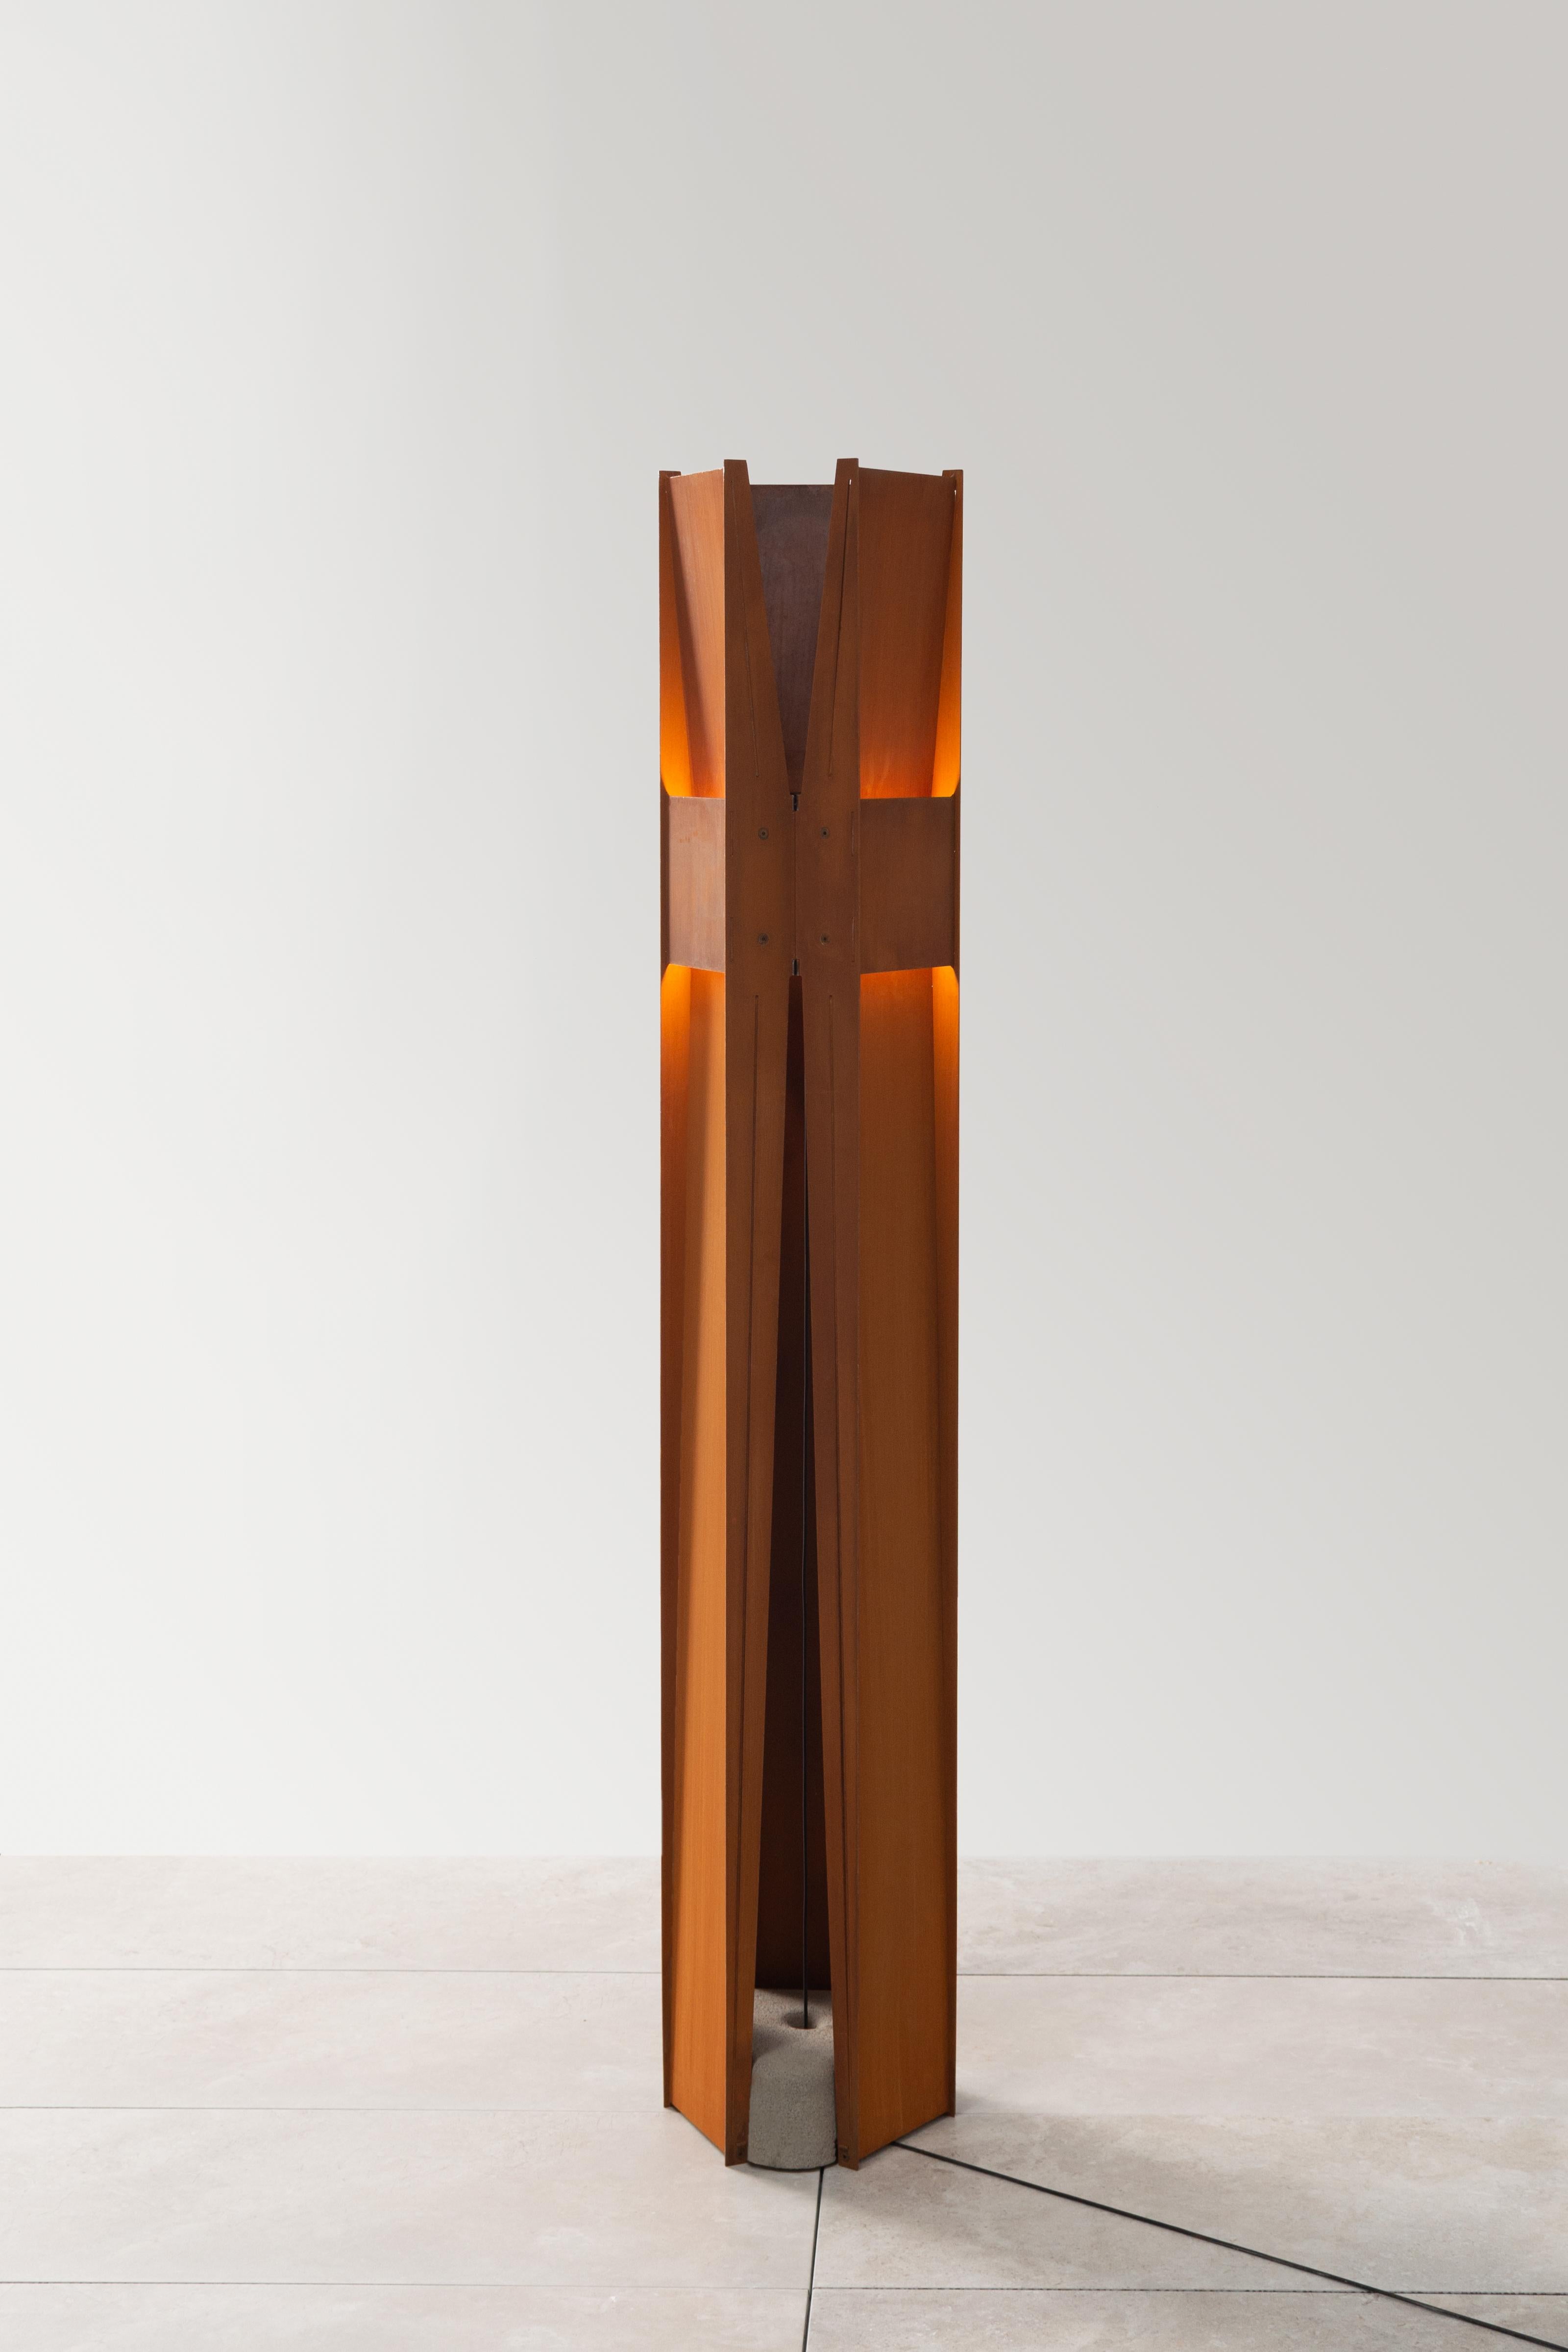 Contemporary Floor Lamp 'Vector'

Model shown: Weathered Steel
Base finish: Concrete

DIMENSIONS
H. 120 x D. 22 cm / H. 47.25” x D. 8.5”

ELECTRICAL
Input Voltage: 110–120V, 220–240V, 110–277V  
Foot dimmer switch included

UL Listed